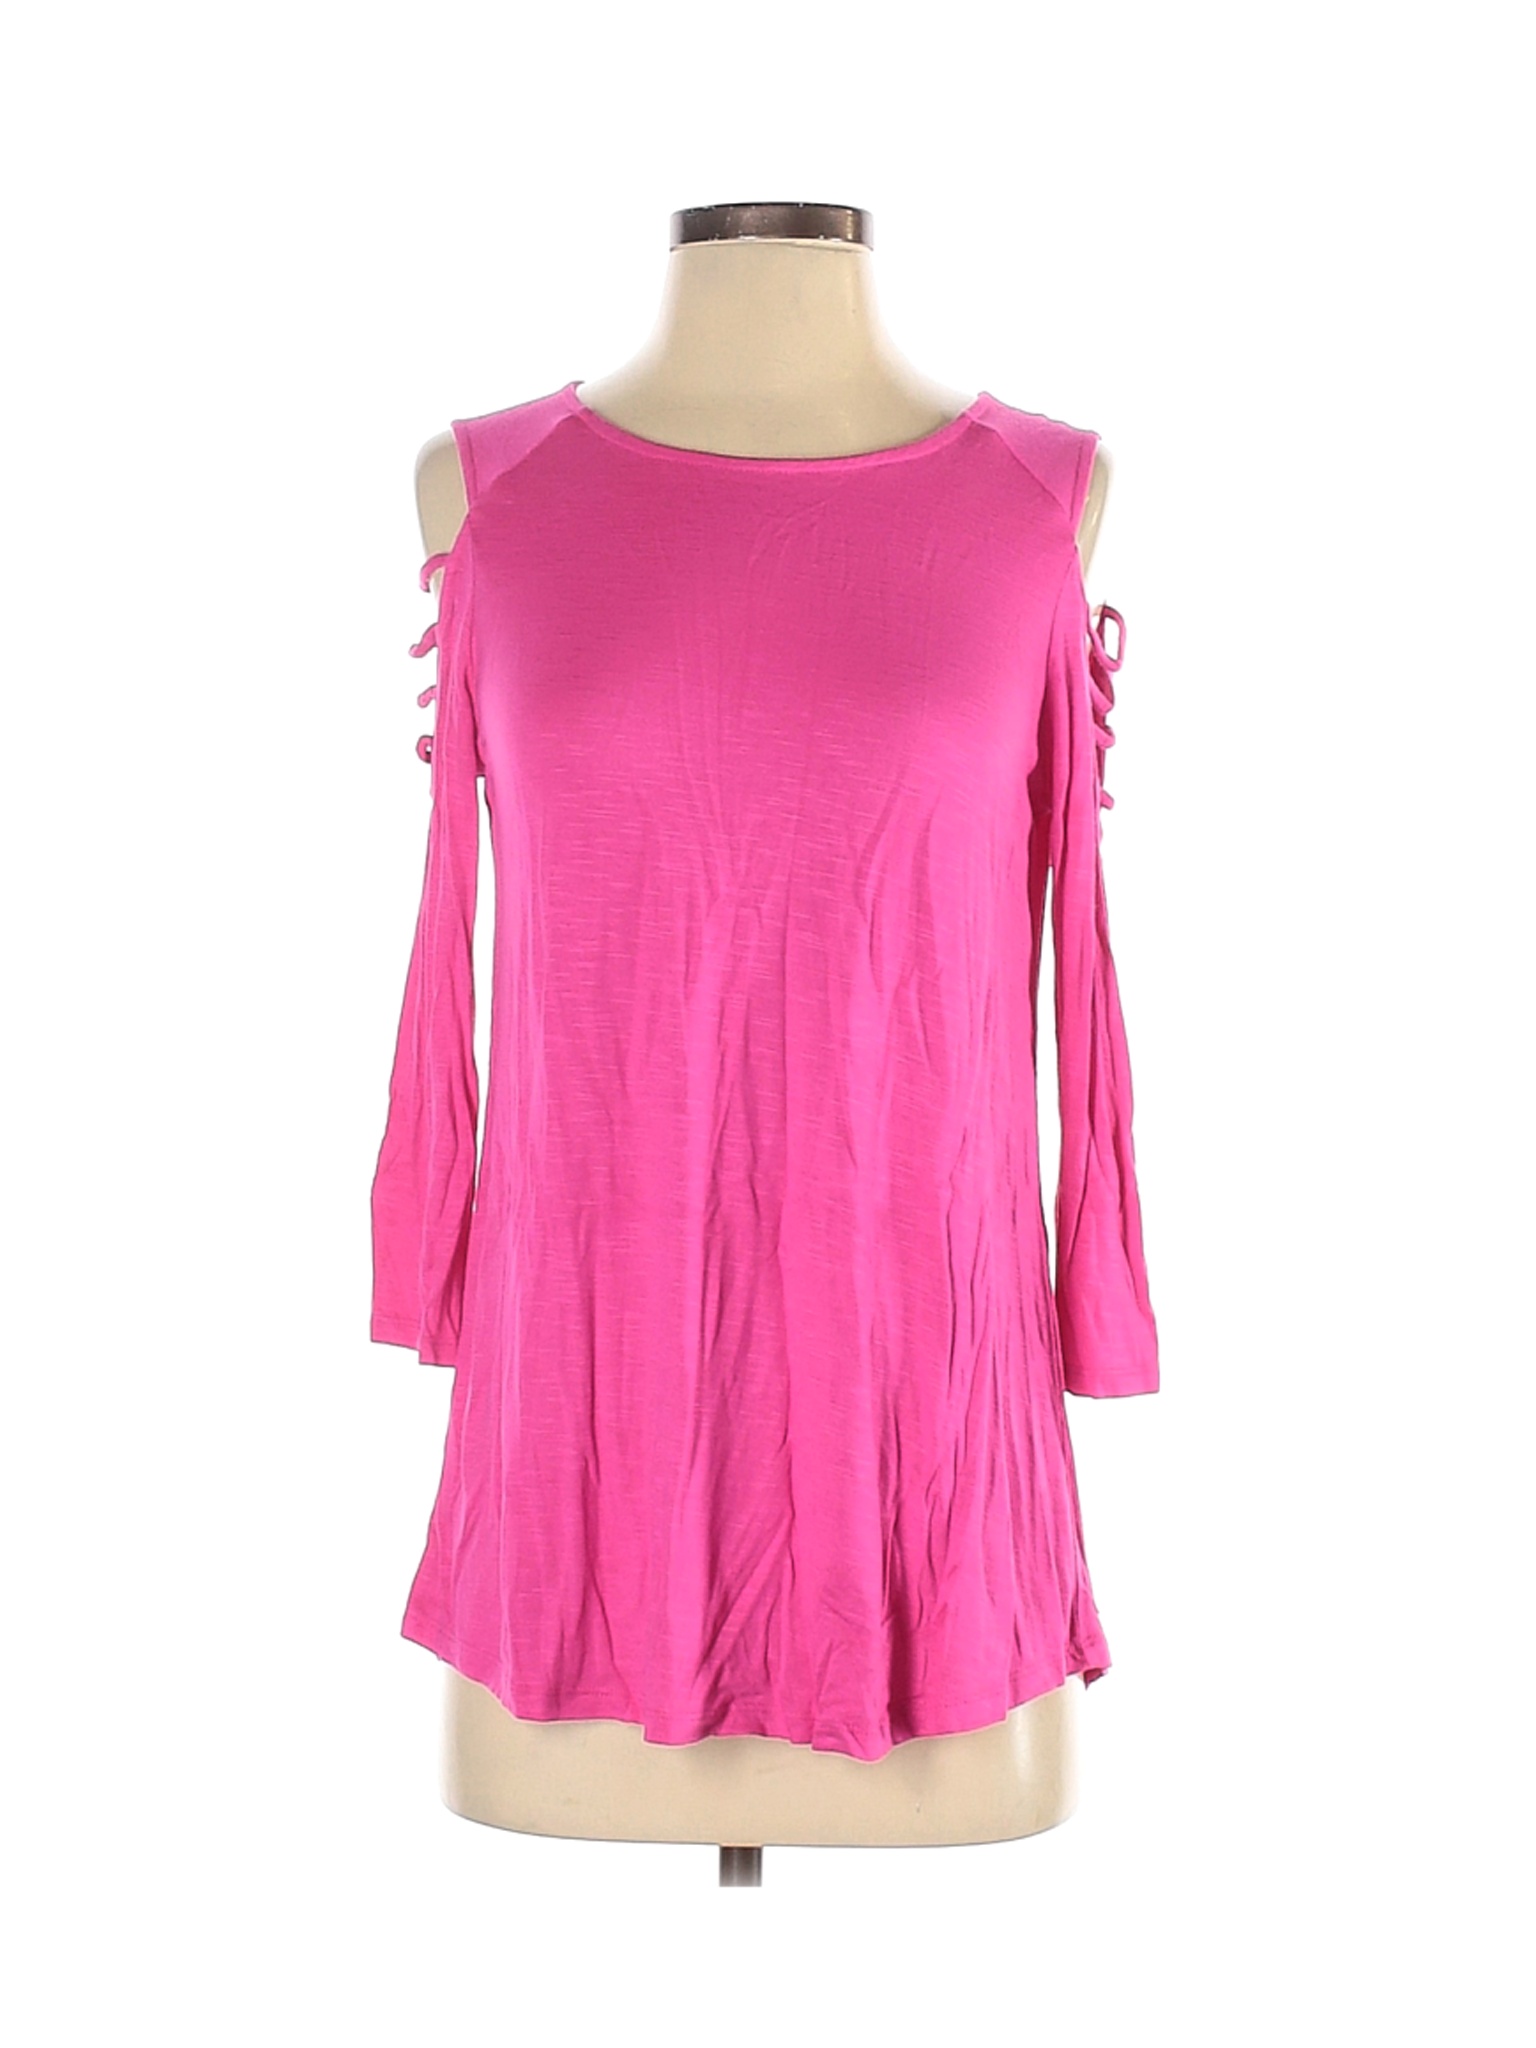 Maurices Women Pink Long Sleeve Top S | eBay